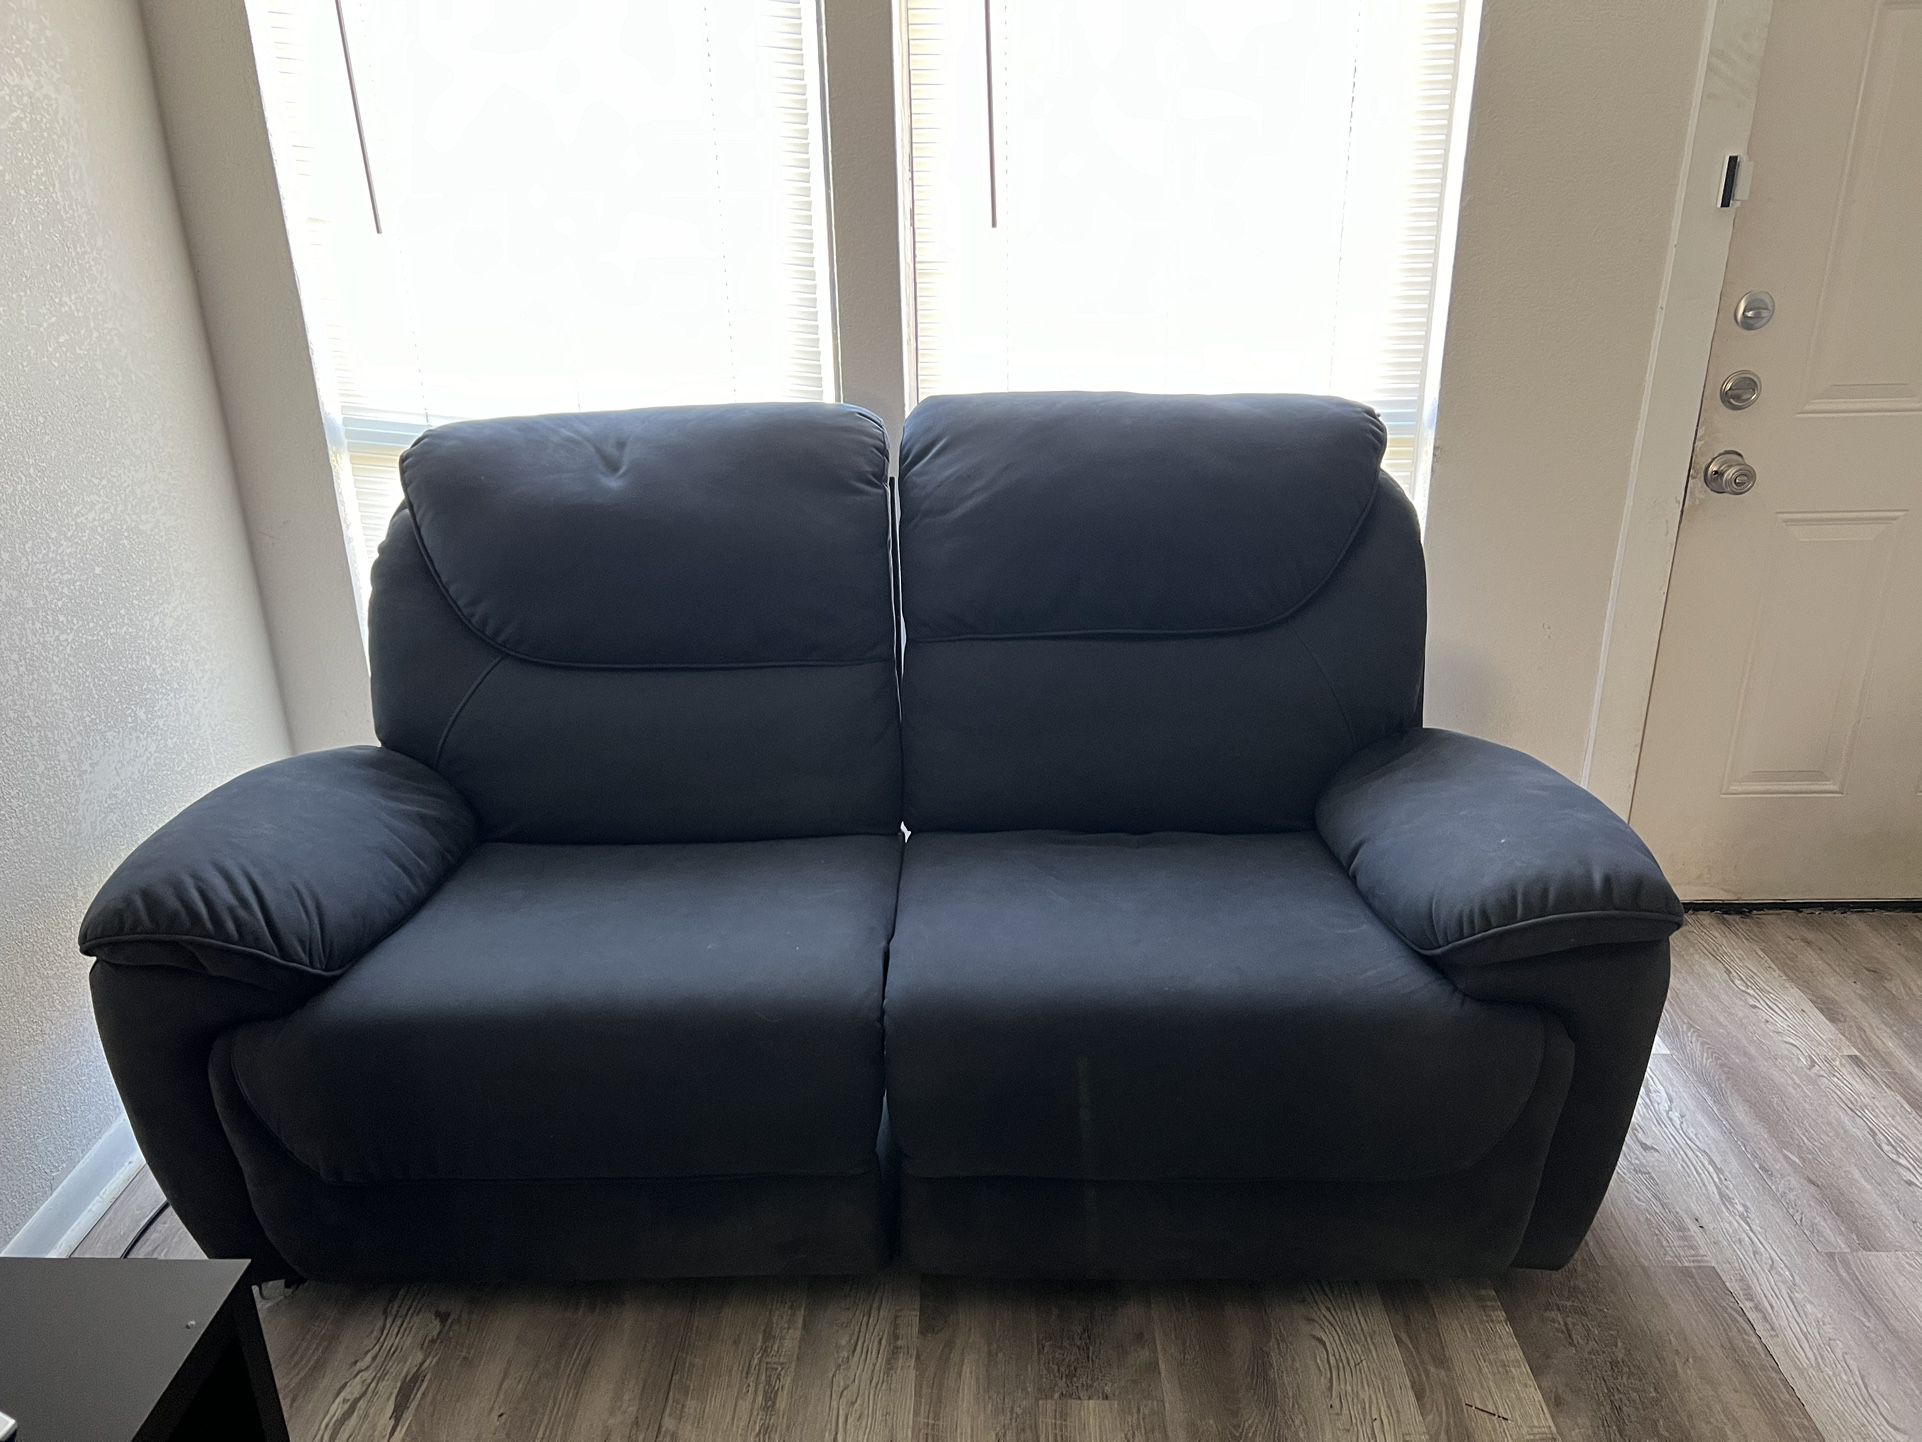 Couch Available